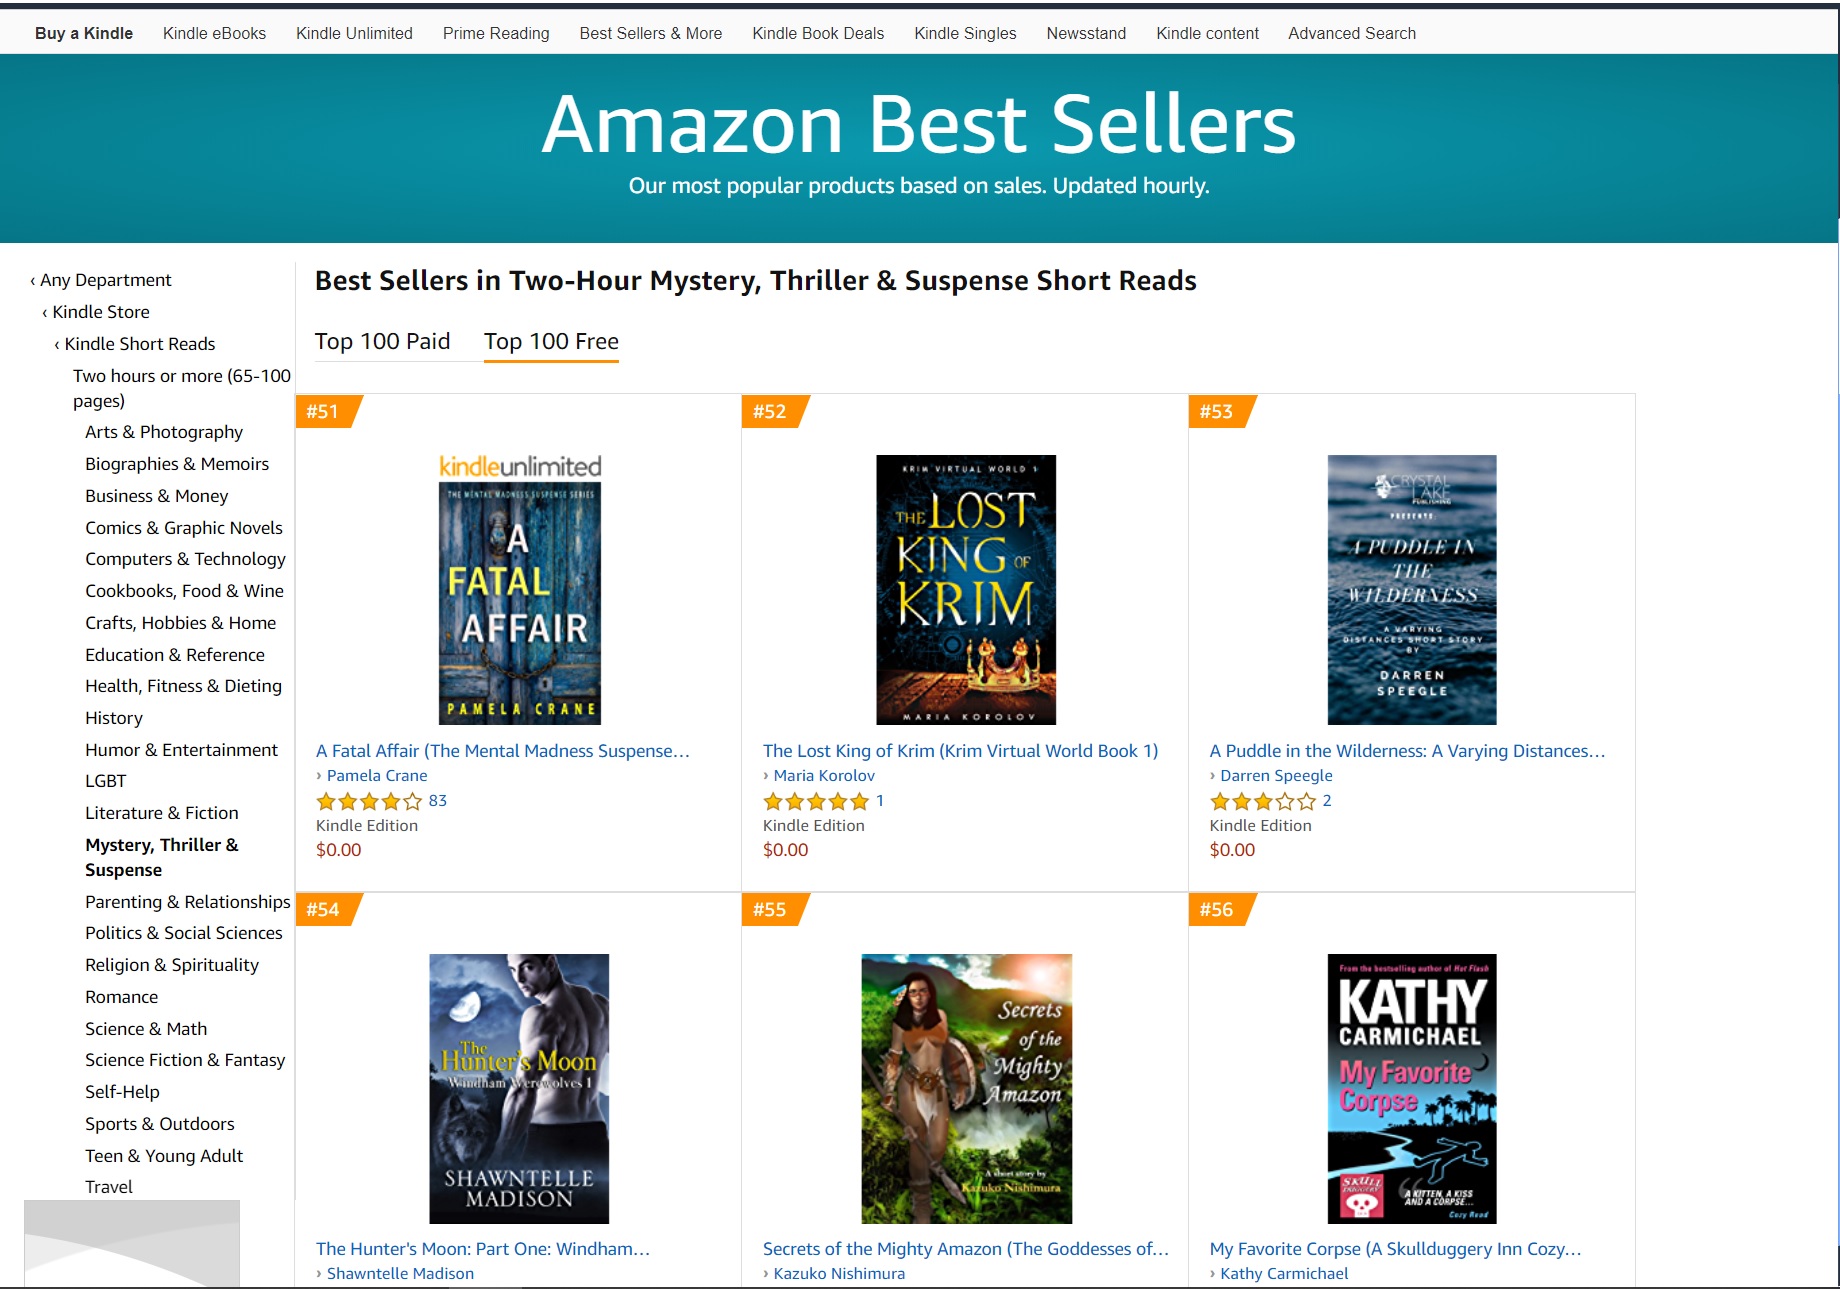 The Lost King of Krim hits multiple Amazon category bestseller lists